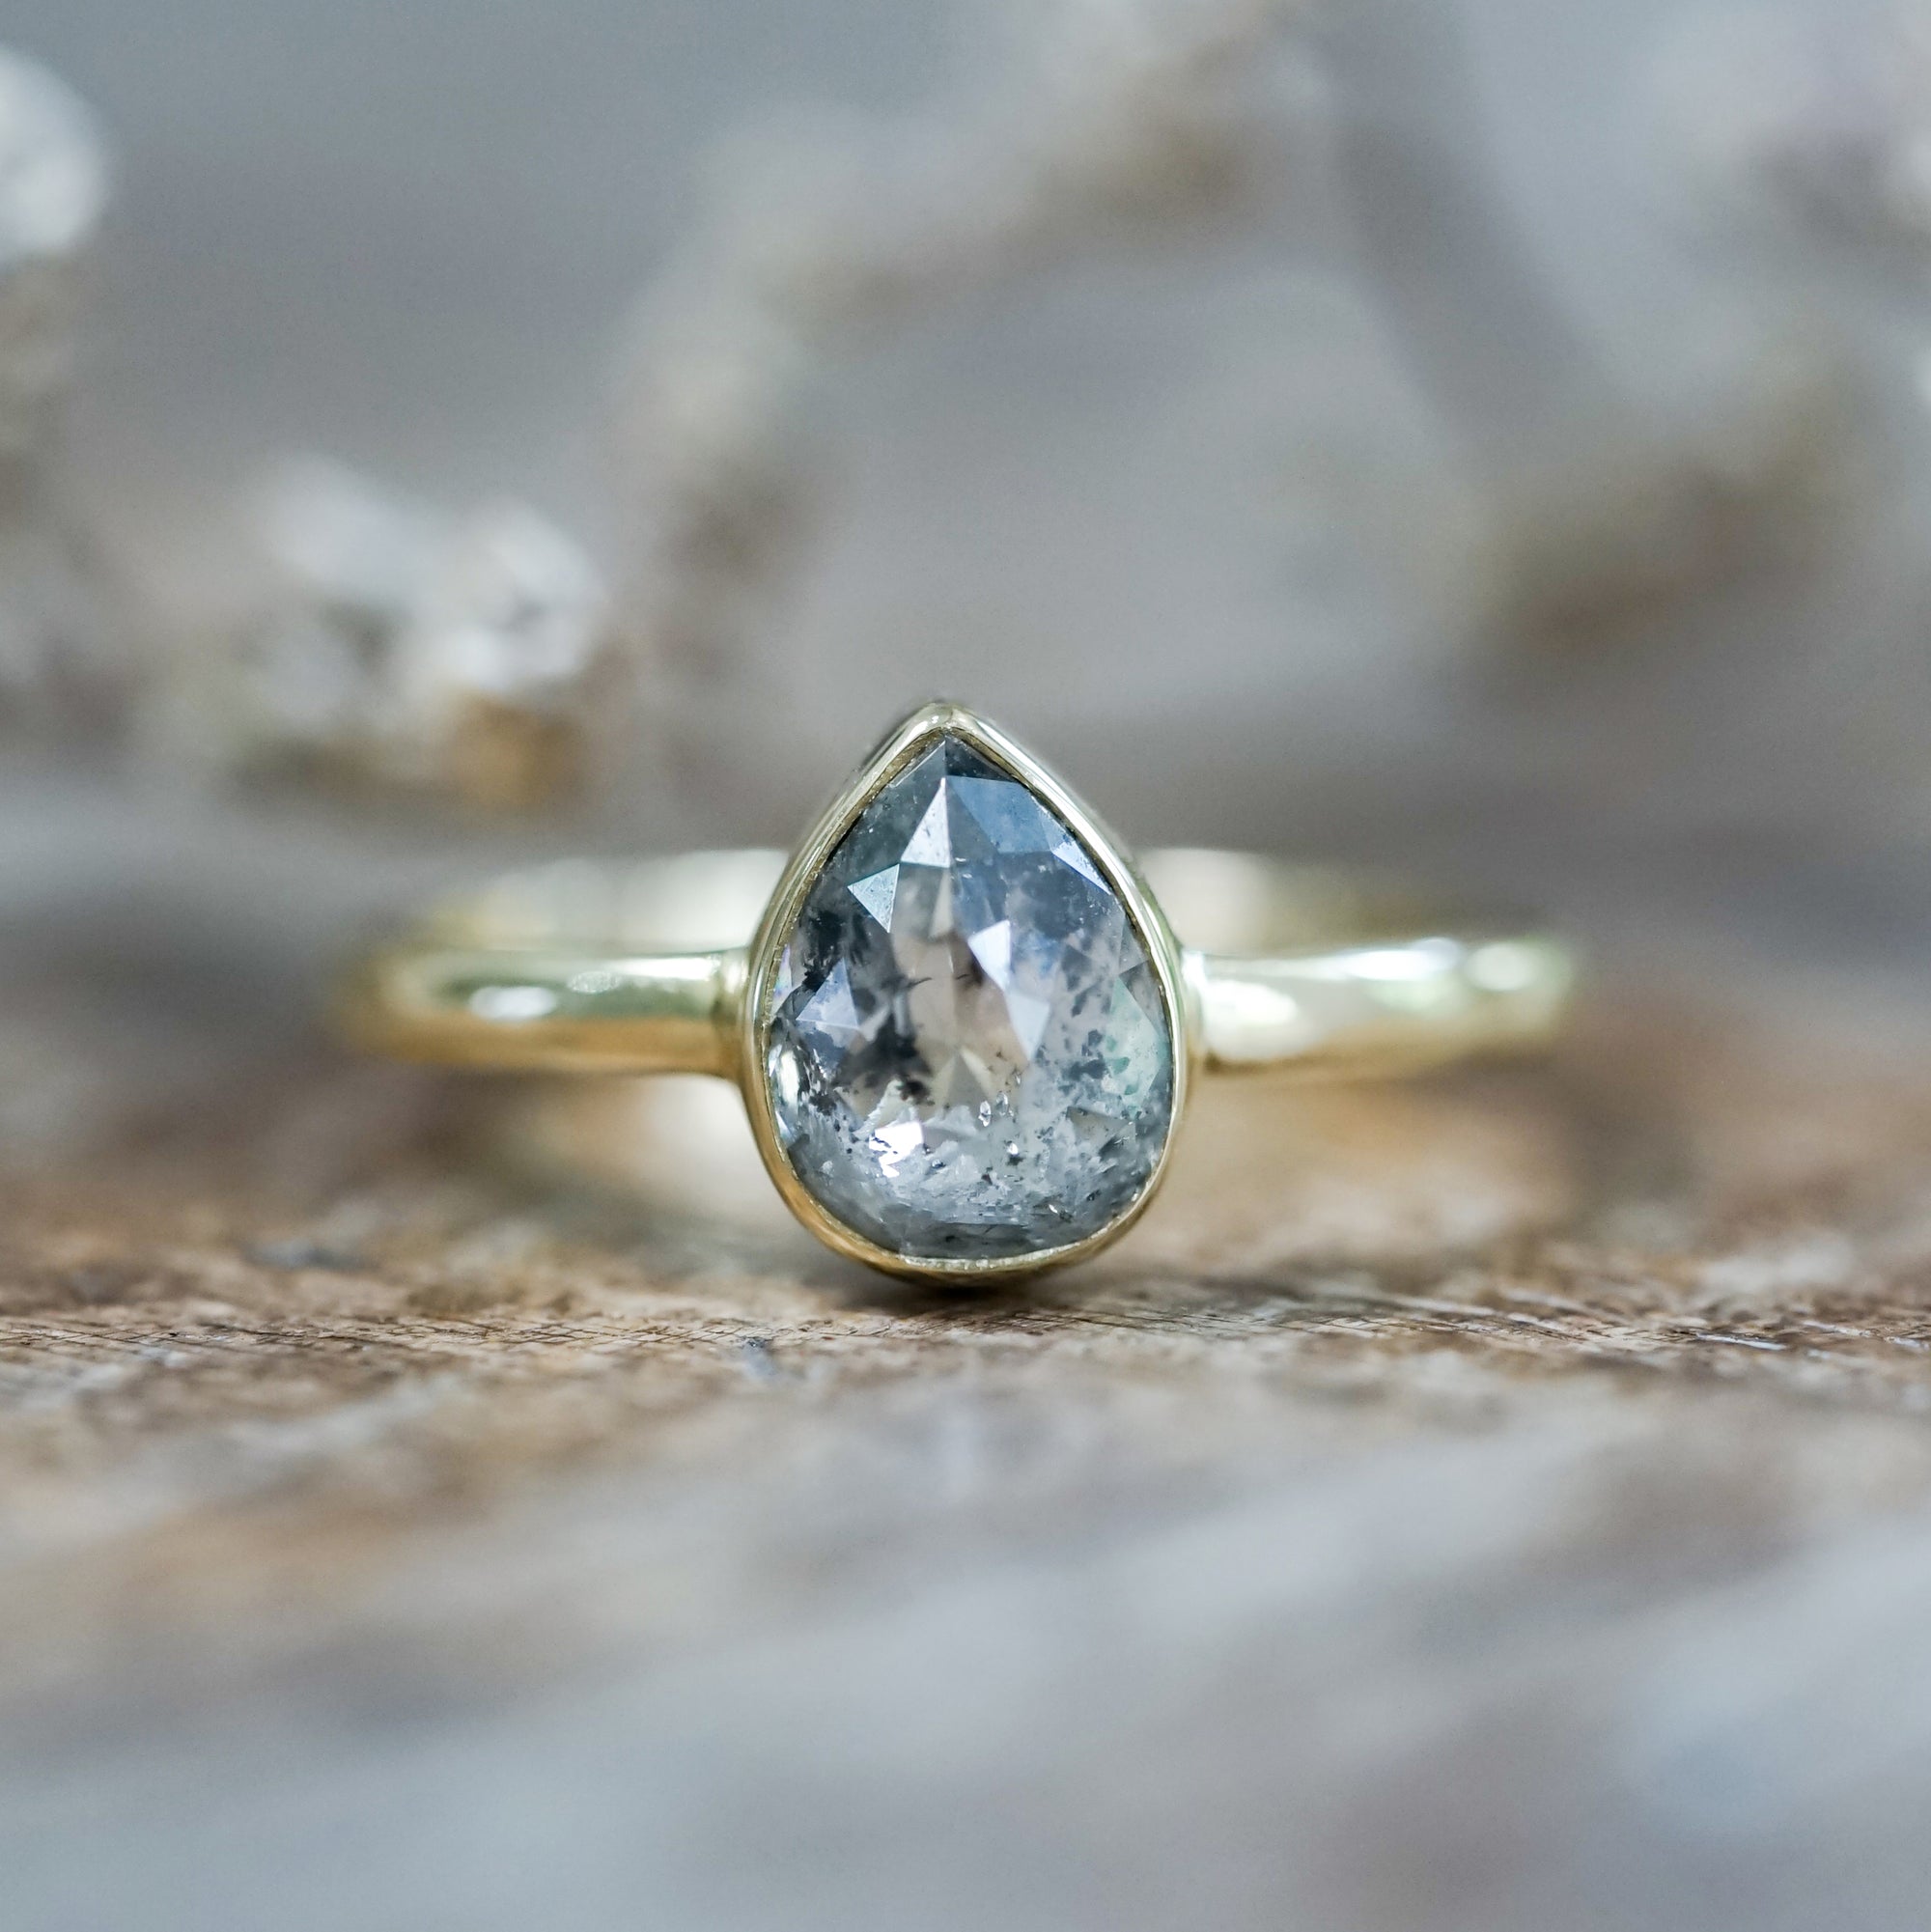 Rose Cut Salt and Pepper Pear Diamond Ring in Ethical Gold - Gardens of the Sun | Ethical Jewelry